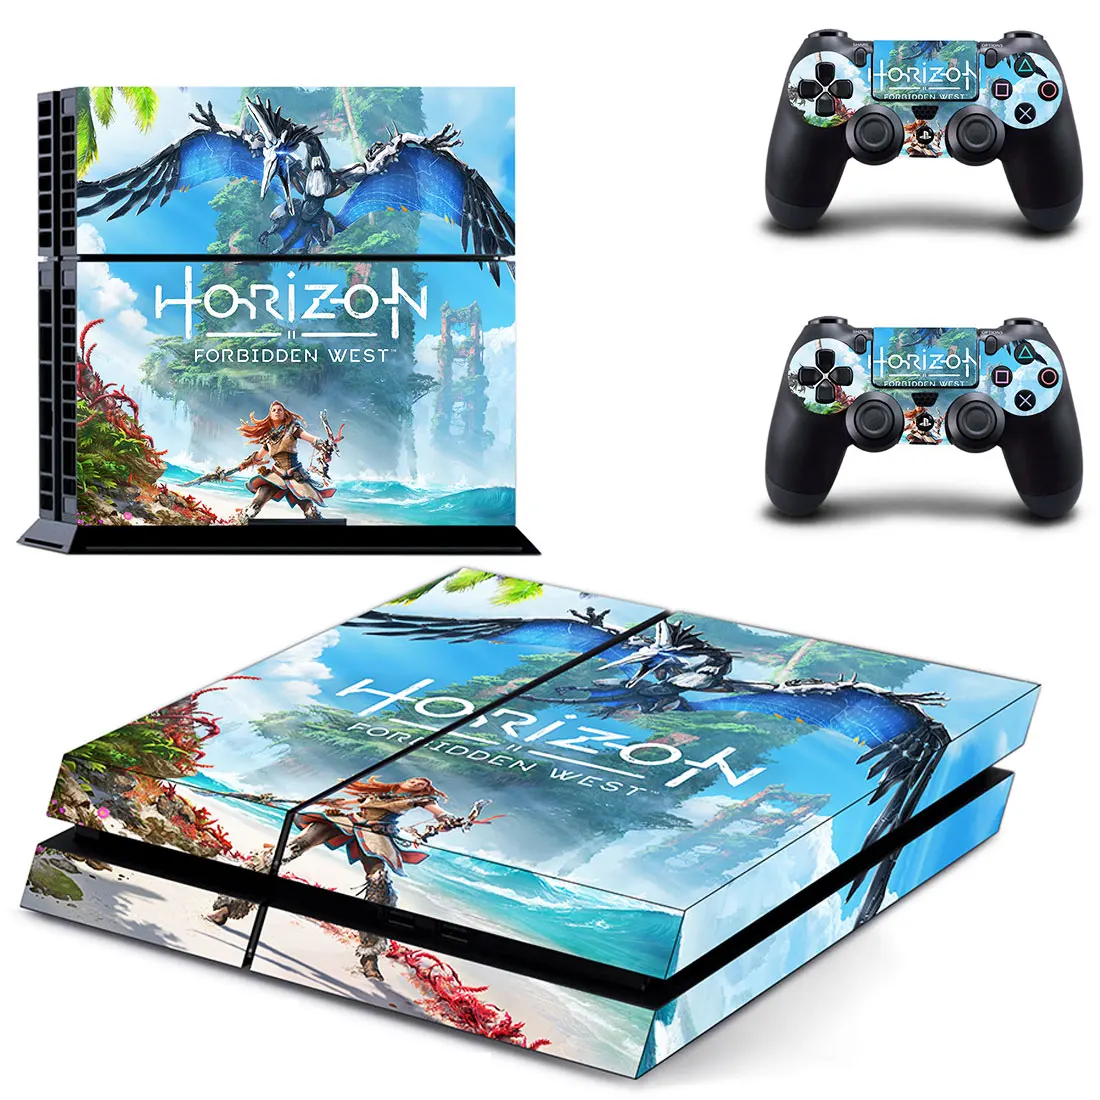 

Horizon Forbidden West PS4 Stickers Play station 4 Skin Sticker Decals For PlayStation 4 PS4 Console & Controller Skins Vinyl